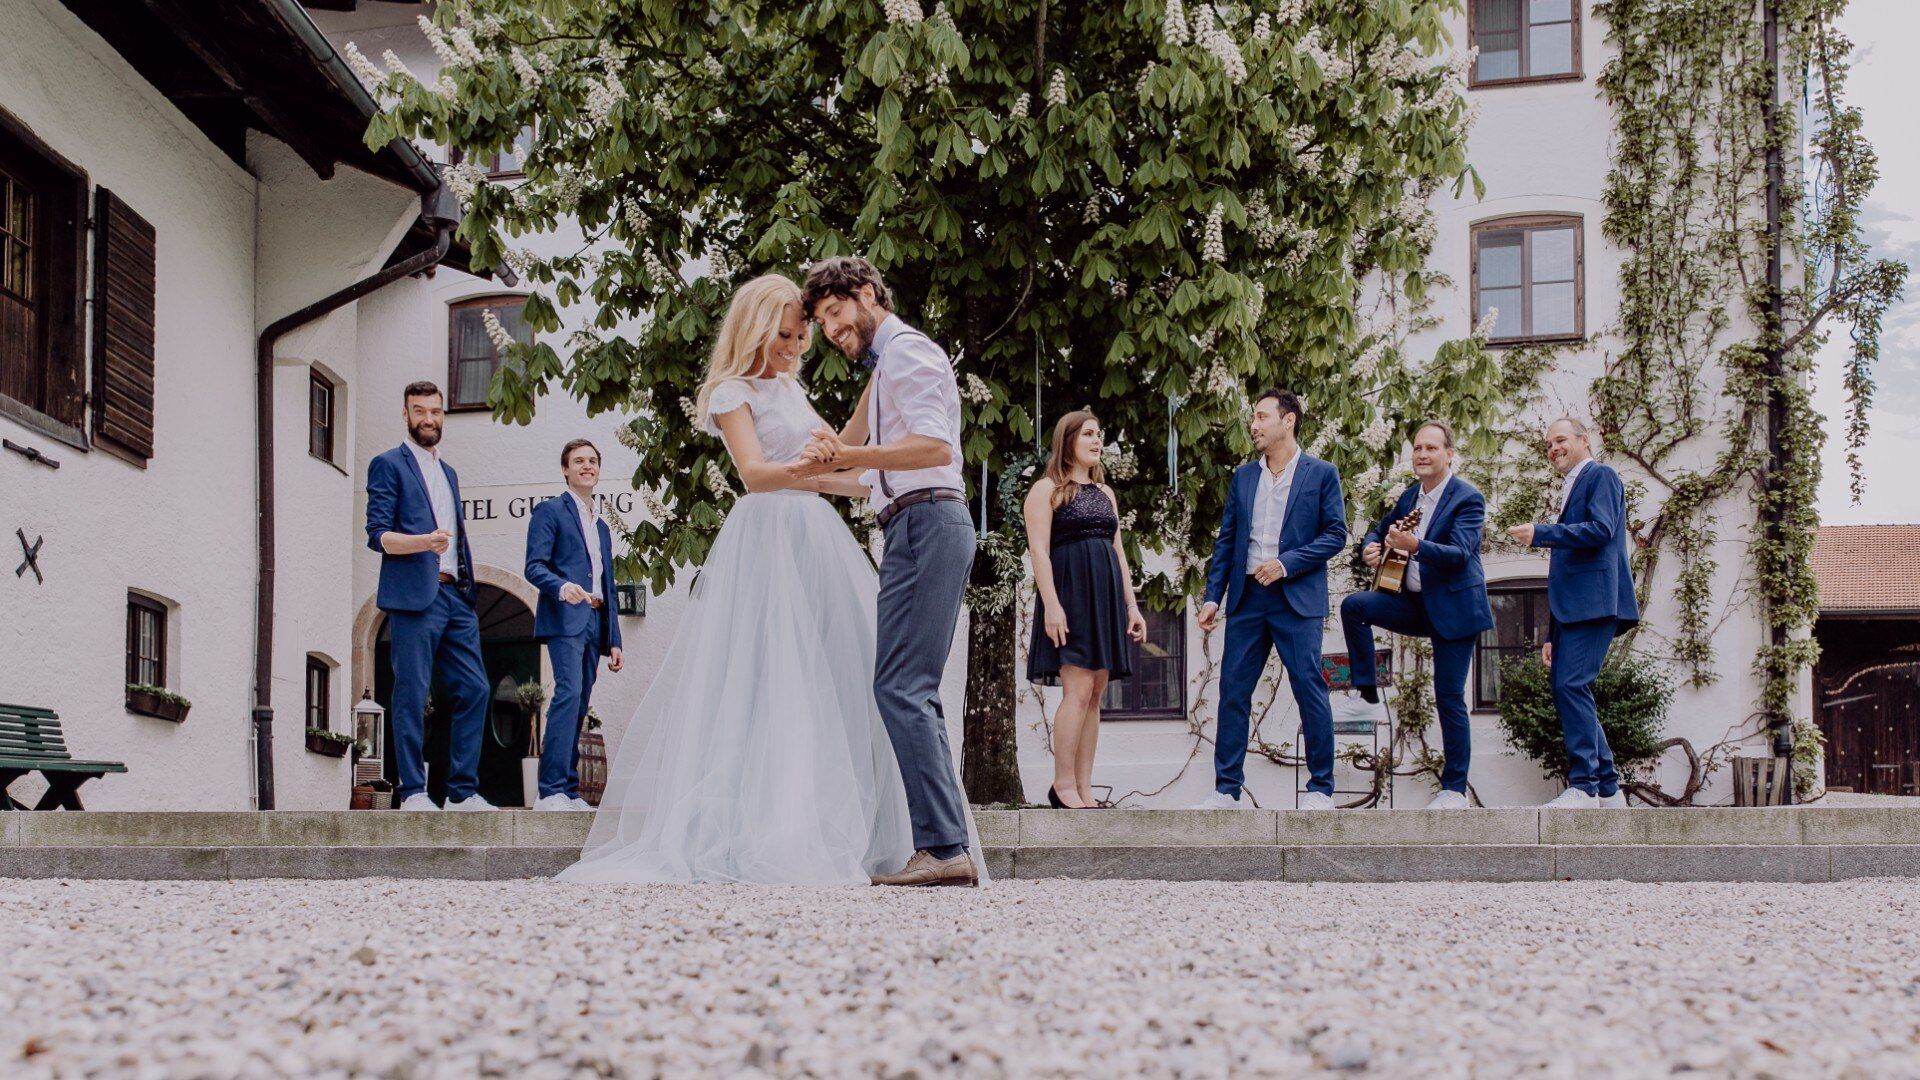 A wedding couple dances in the historic courtyard of Hotel Gut Ising on Lake Chiemsee while a band, dressed all in blue, plays music in the background.